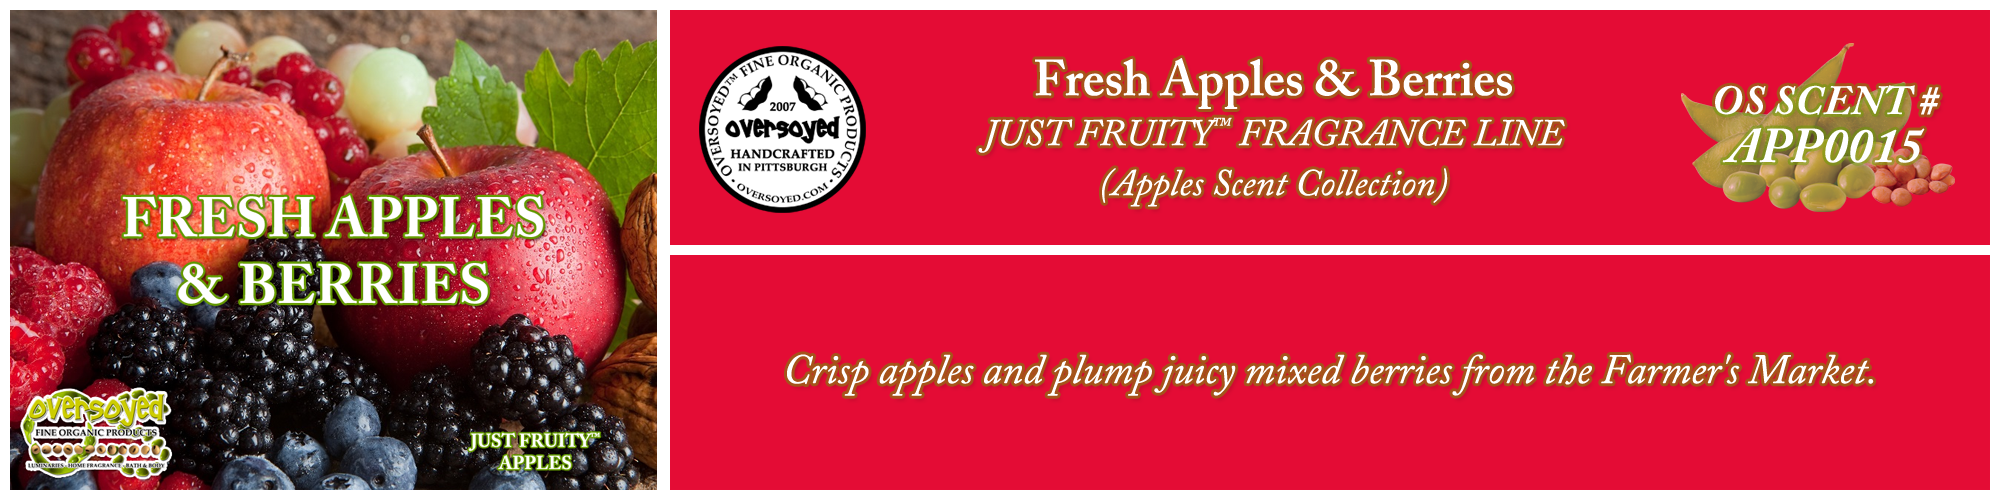 Fresh Apples & Berries Handcrafted Products Collection